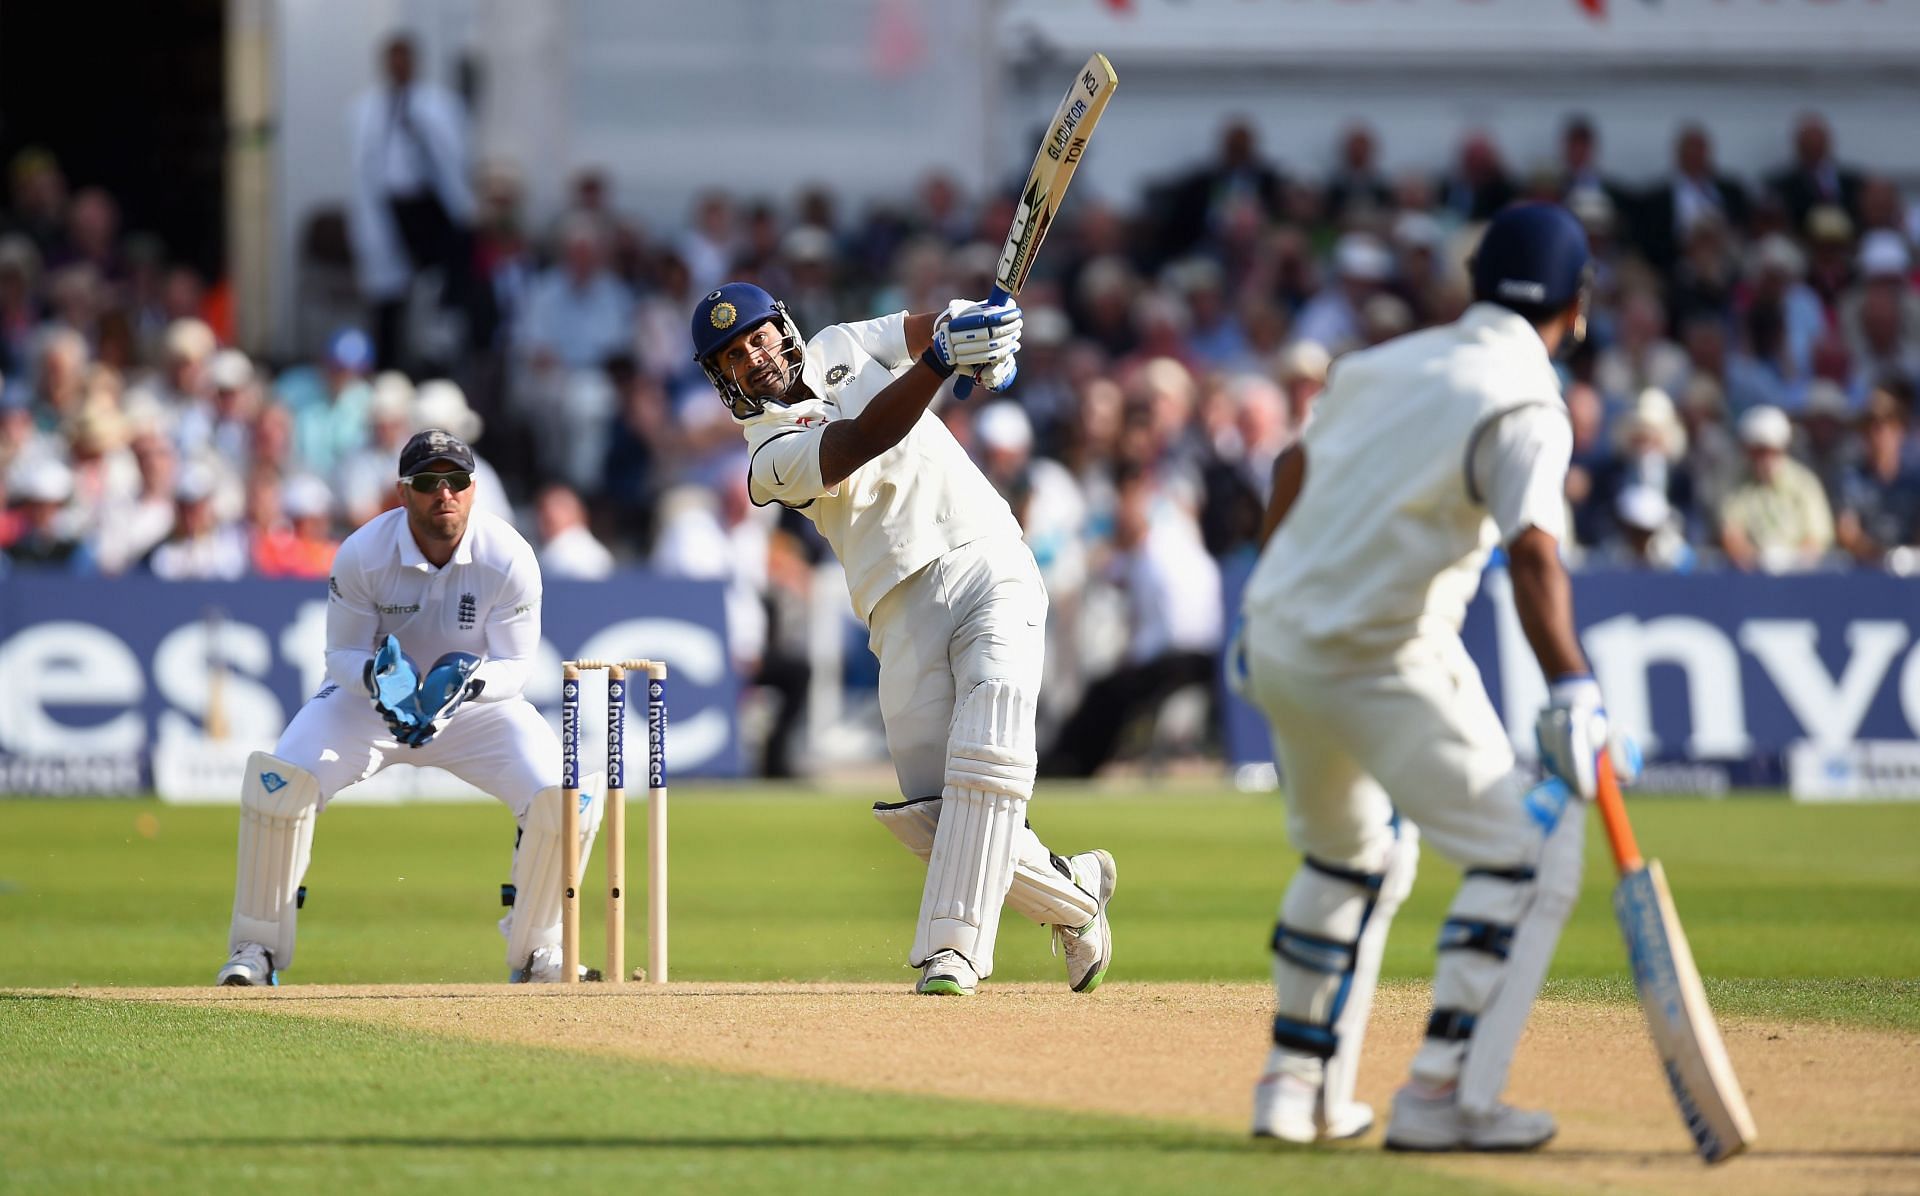 The opener in action during the 2014 Nottingham Test. Pic: Getty Images